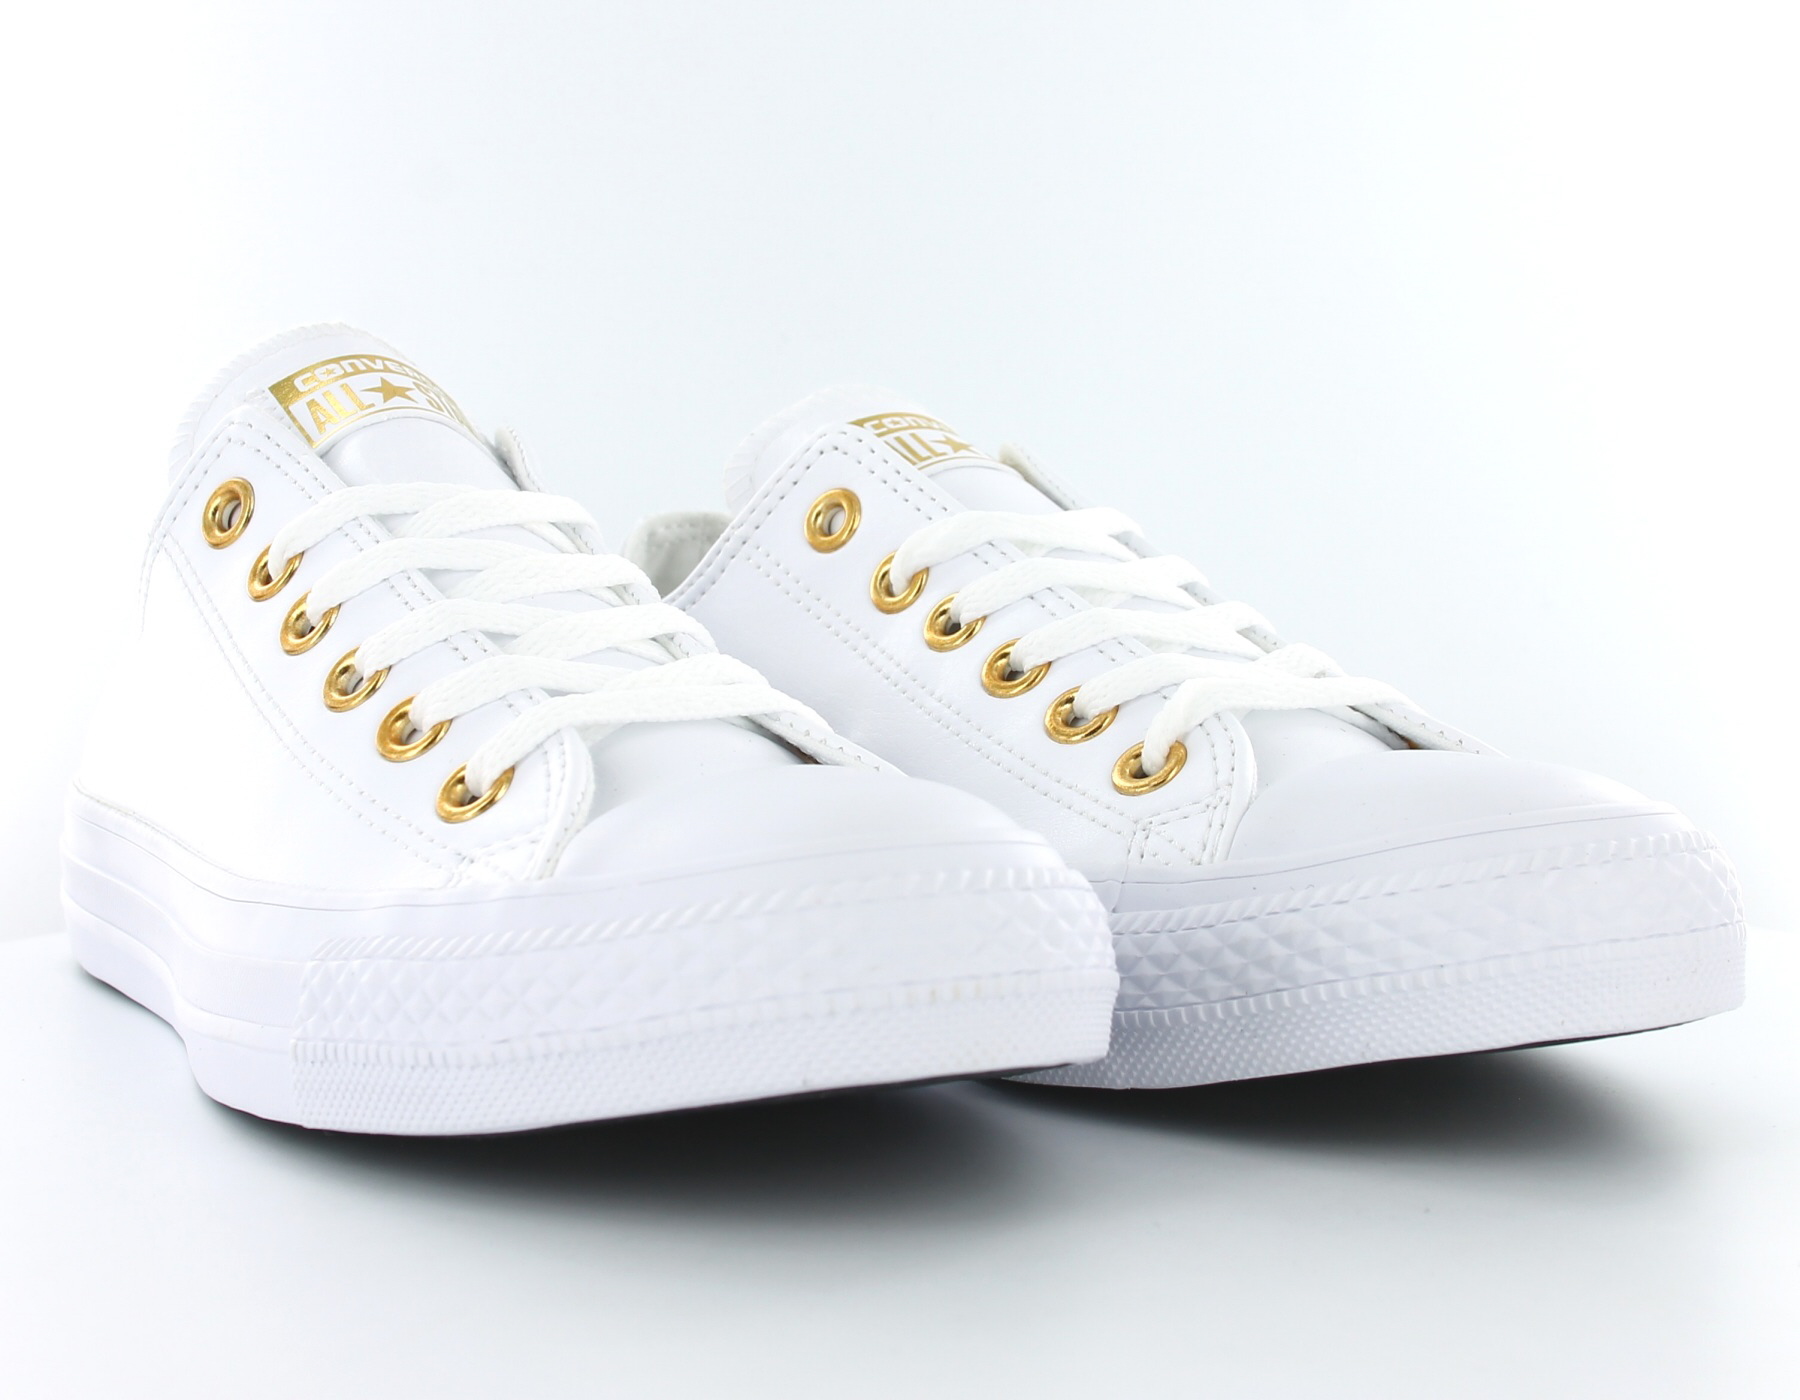 converse all star blanche et or